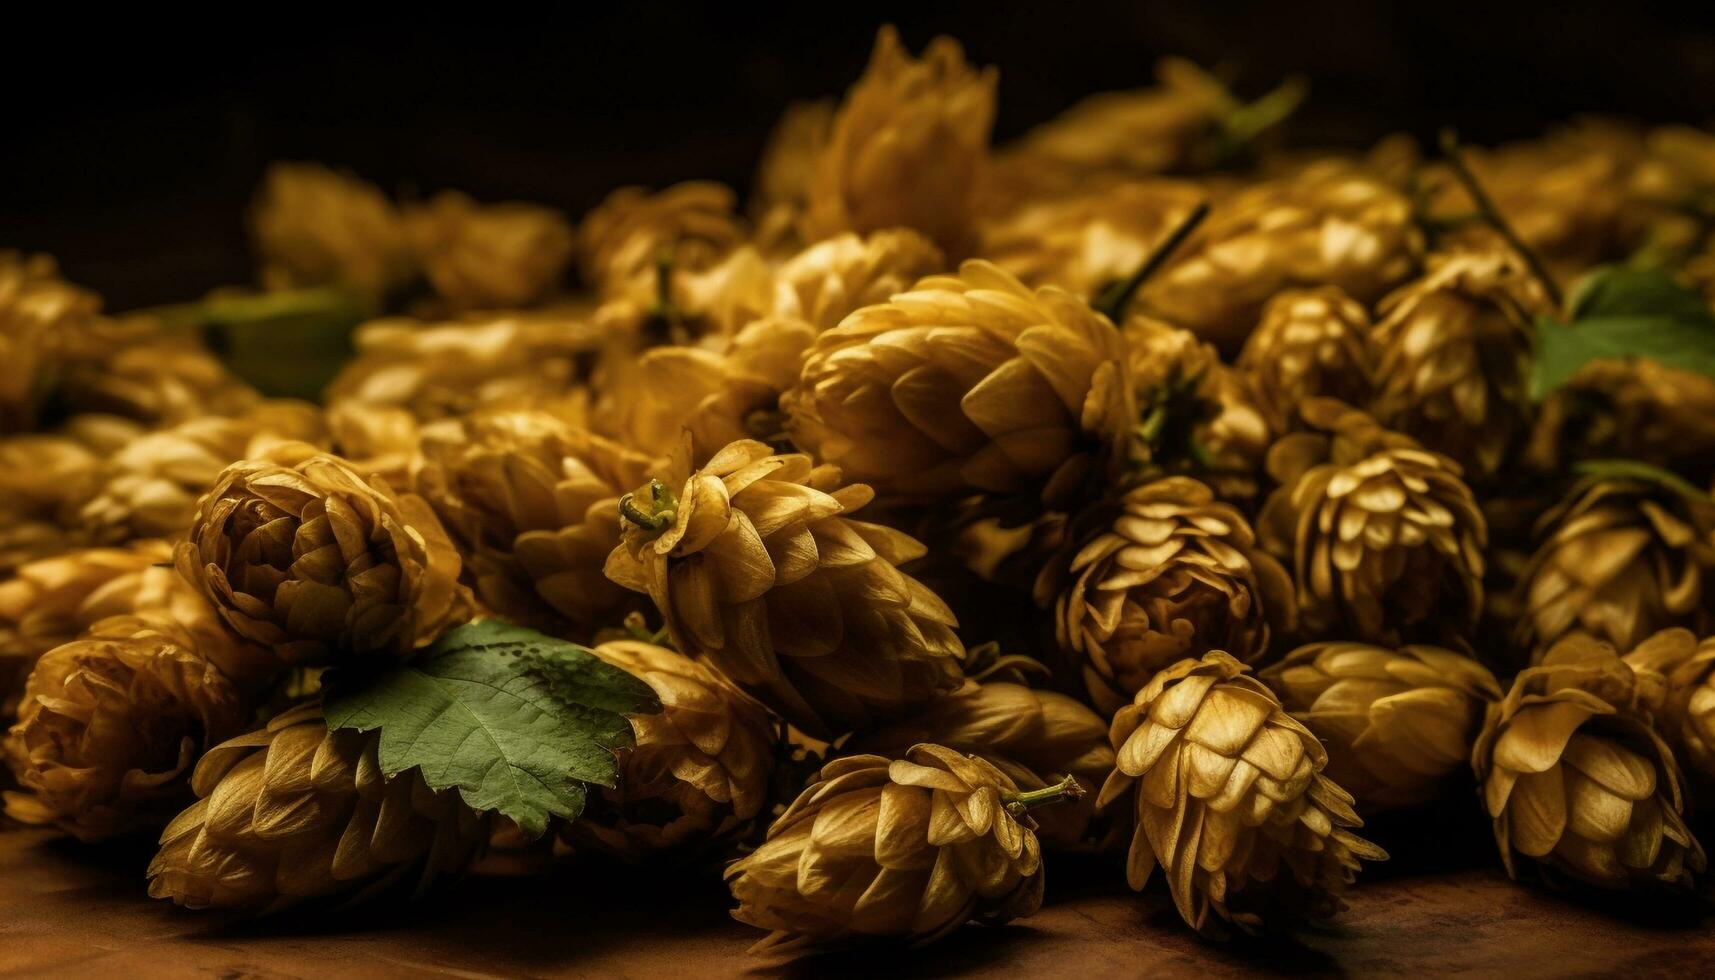 Organic pine cone spice adds autumn flavor generated by AI photo